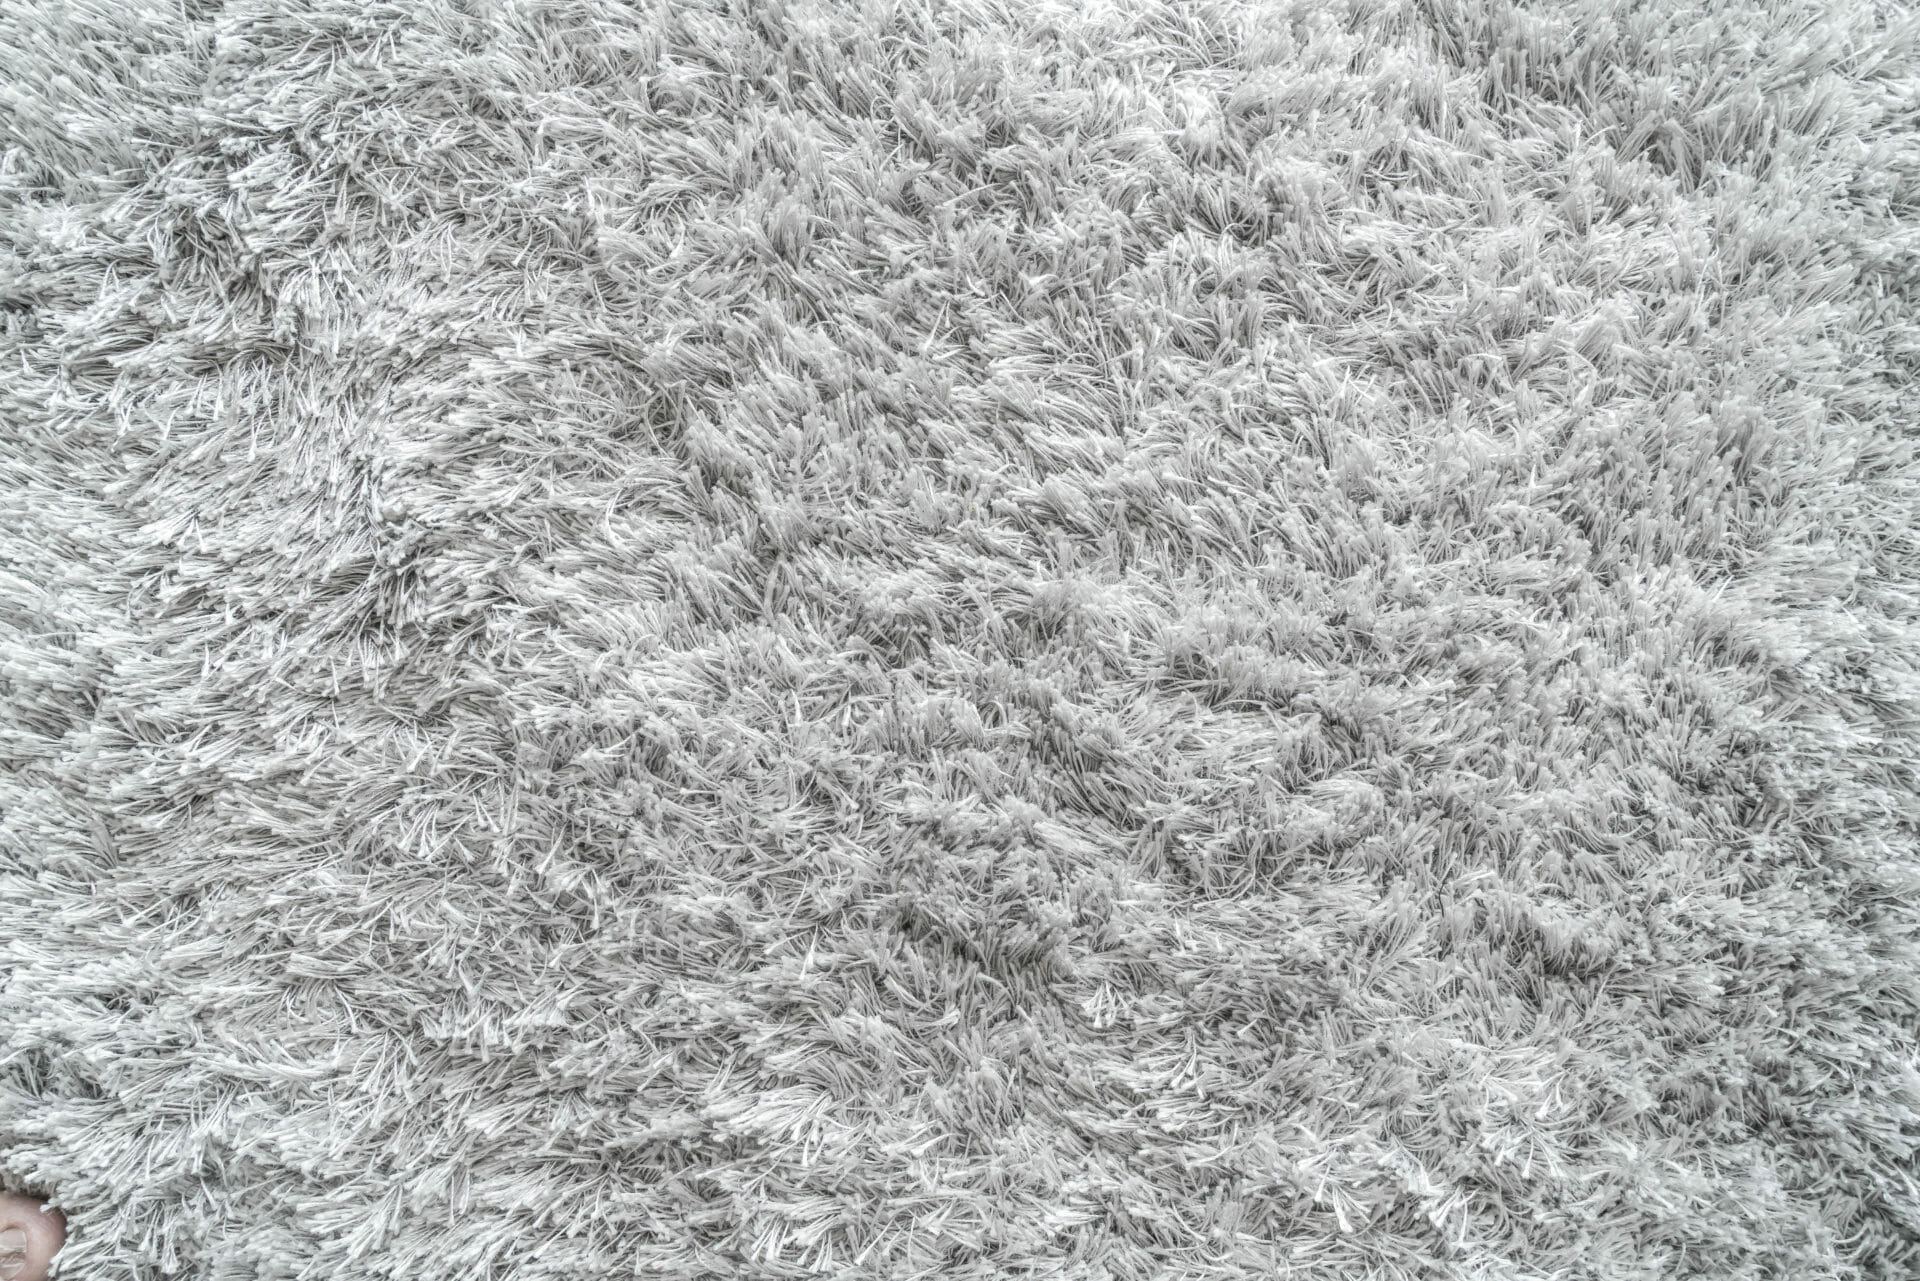 How To Make Carpet Soft And Fluffy Again (Expert Tips)